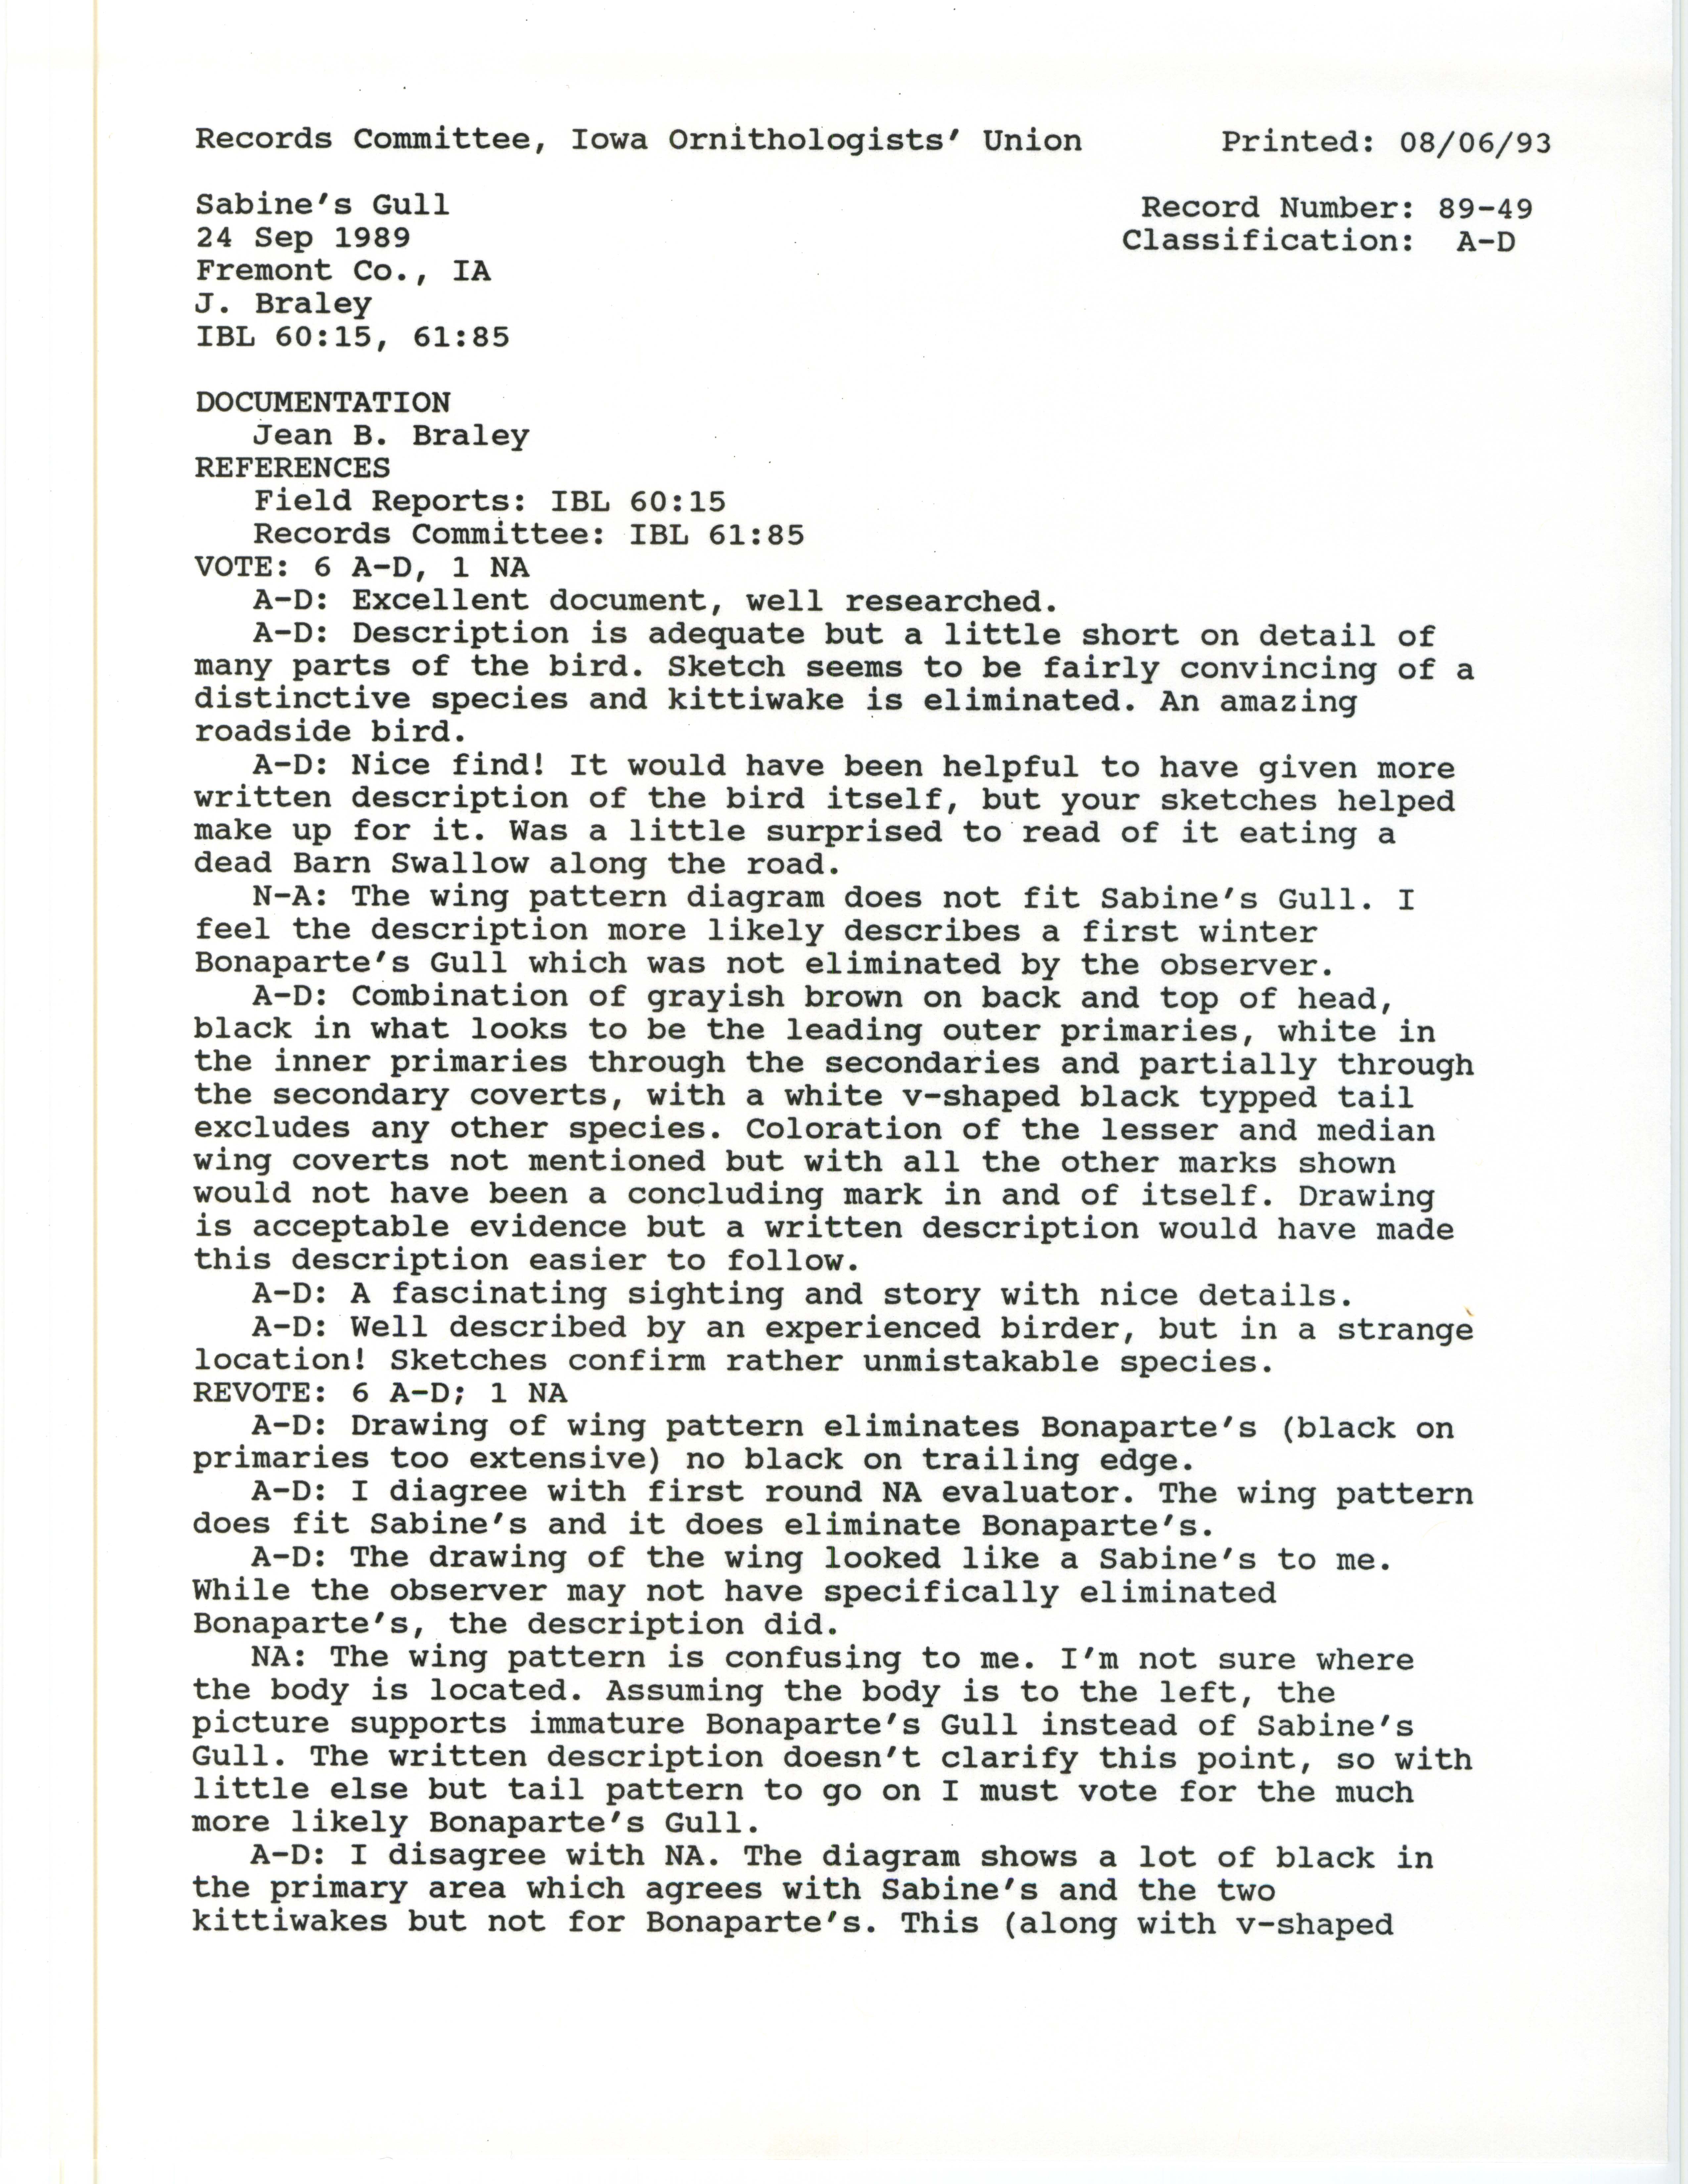 Records Committee review for rare bird sighting of Sabine's Gull north of Farragut, 1989